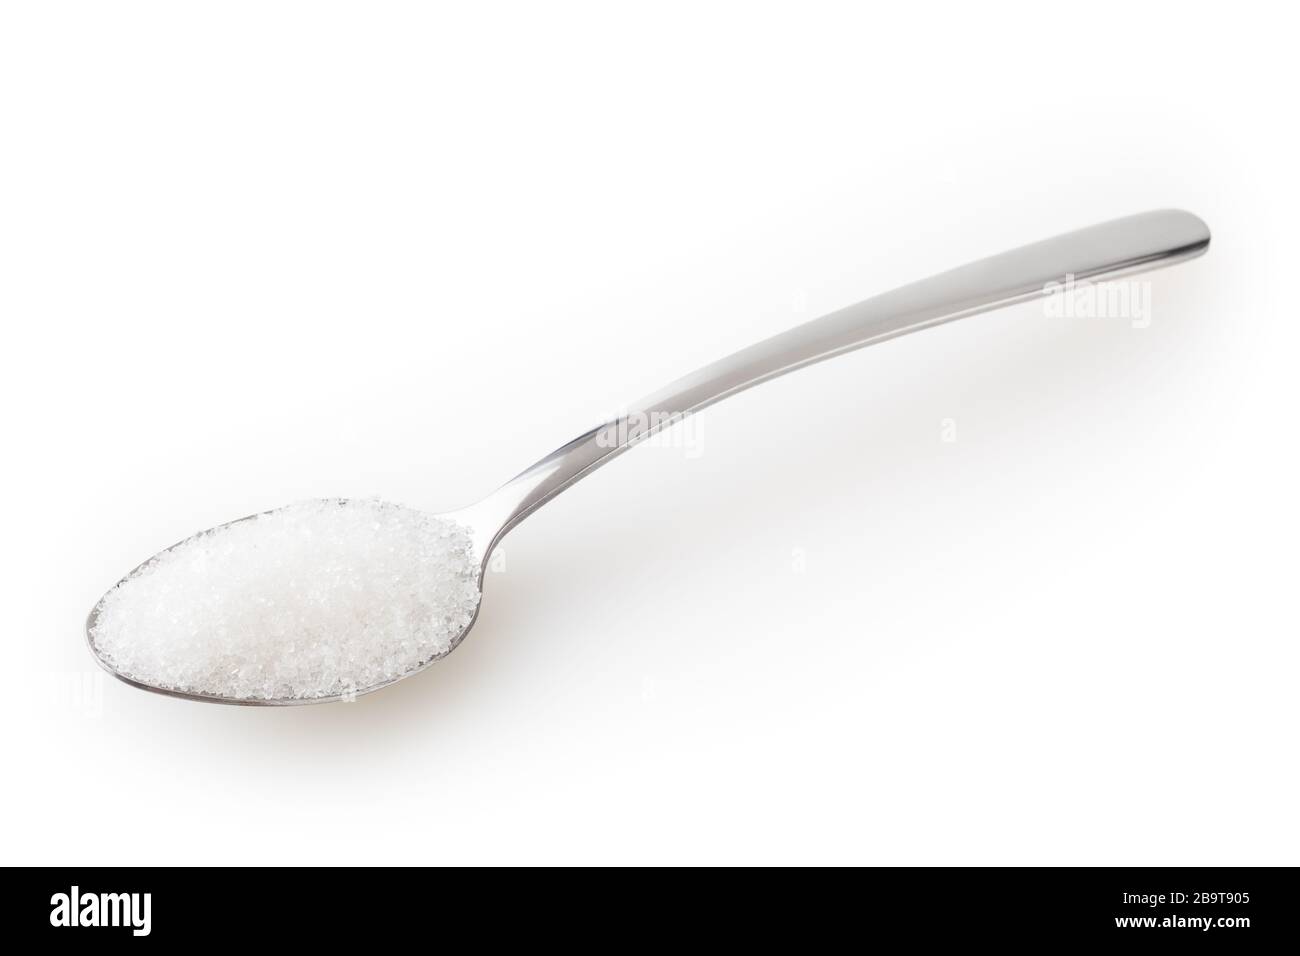 Teaspoon of sugar isolated on white background with clipping path Stock Photo